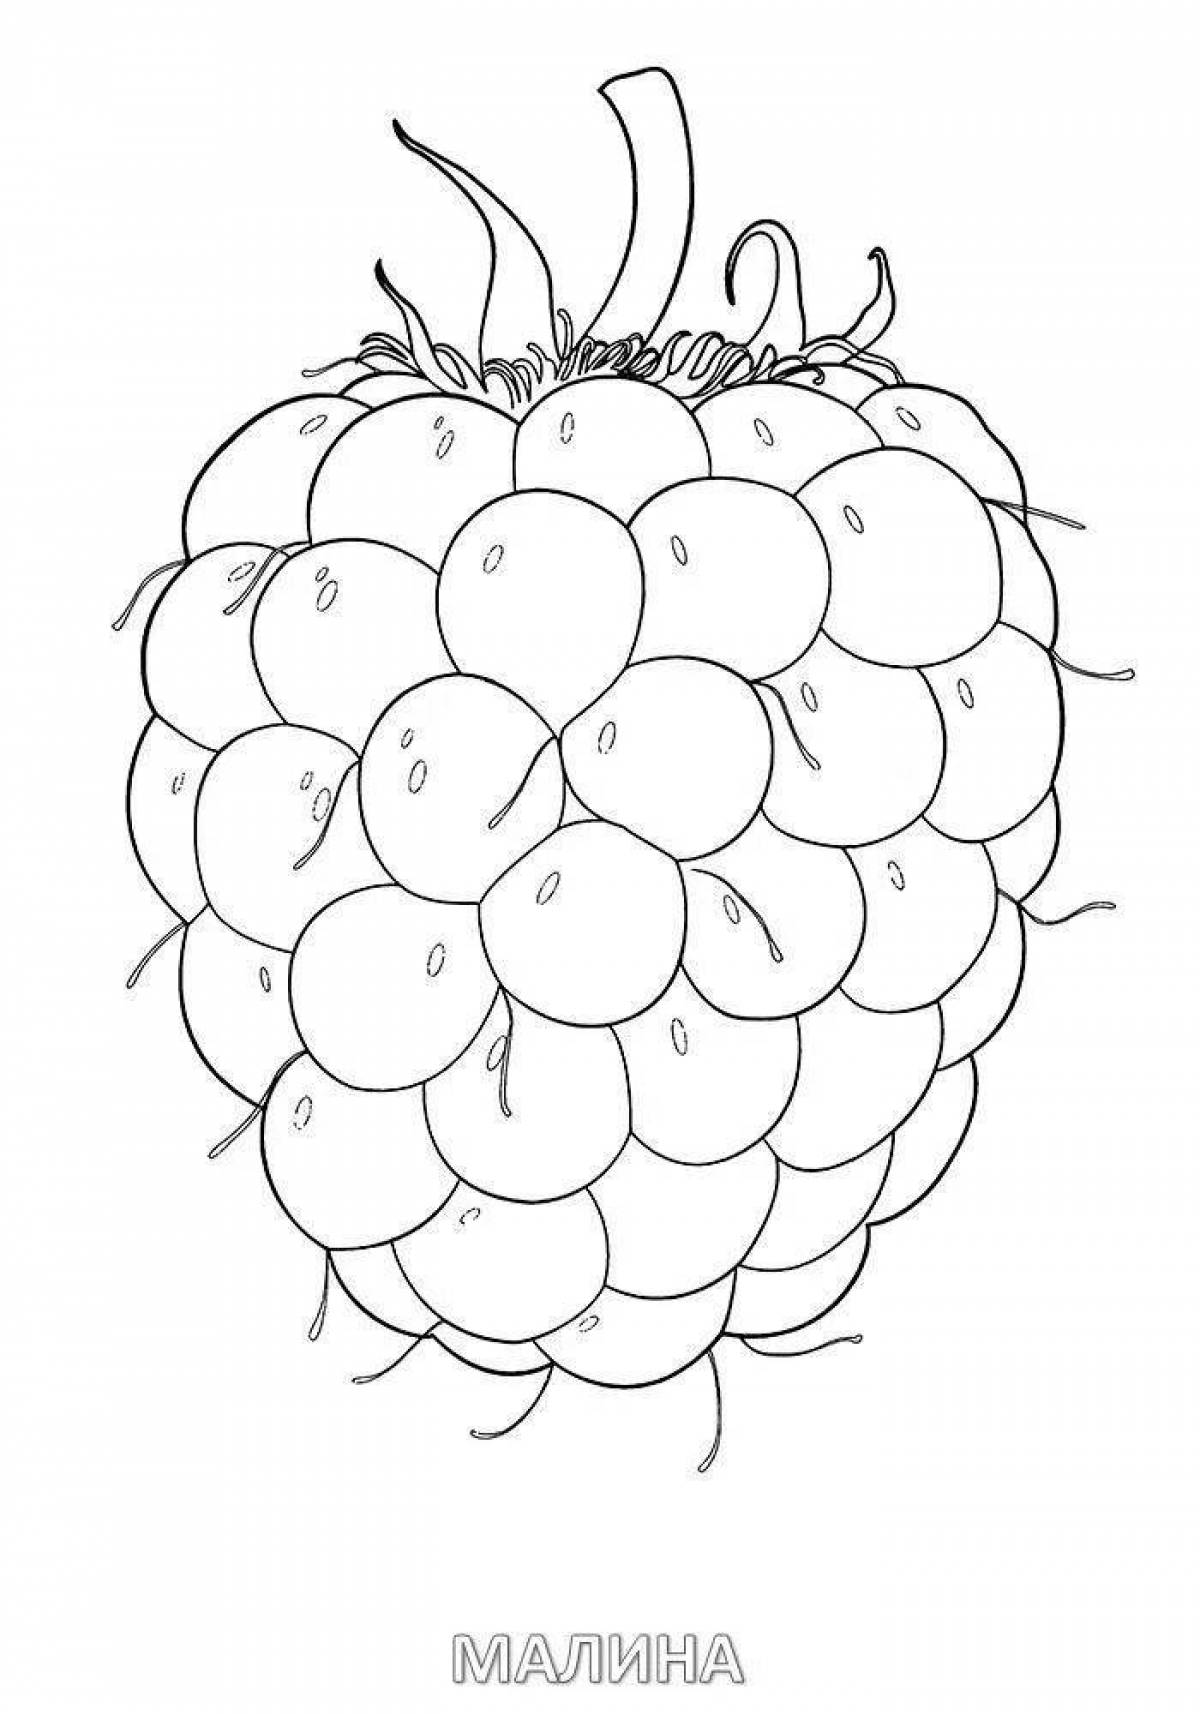 Creative raspberry coloring book for kids